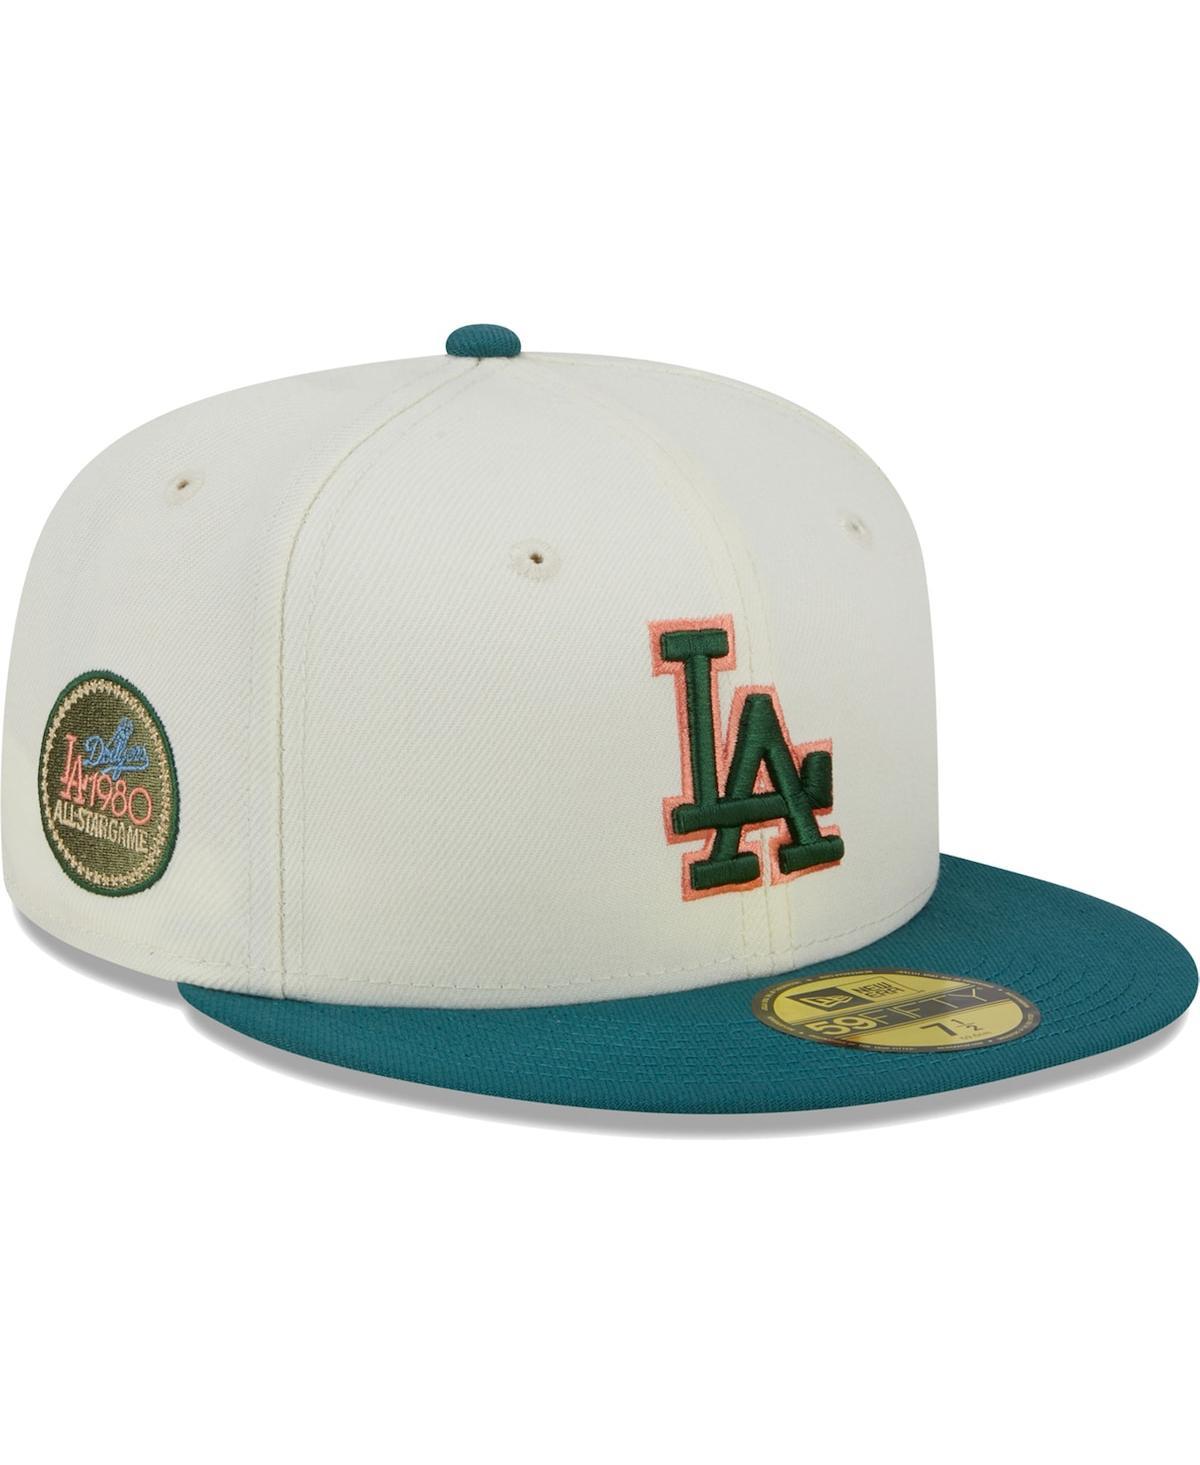 Men's New Era Los Angeles Dodgers Black on DUB 59FIFTY Fitted Hat